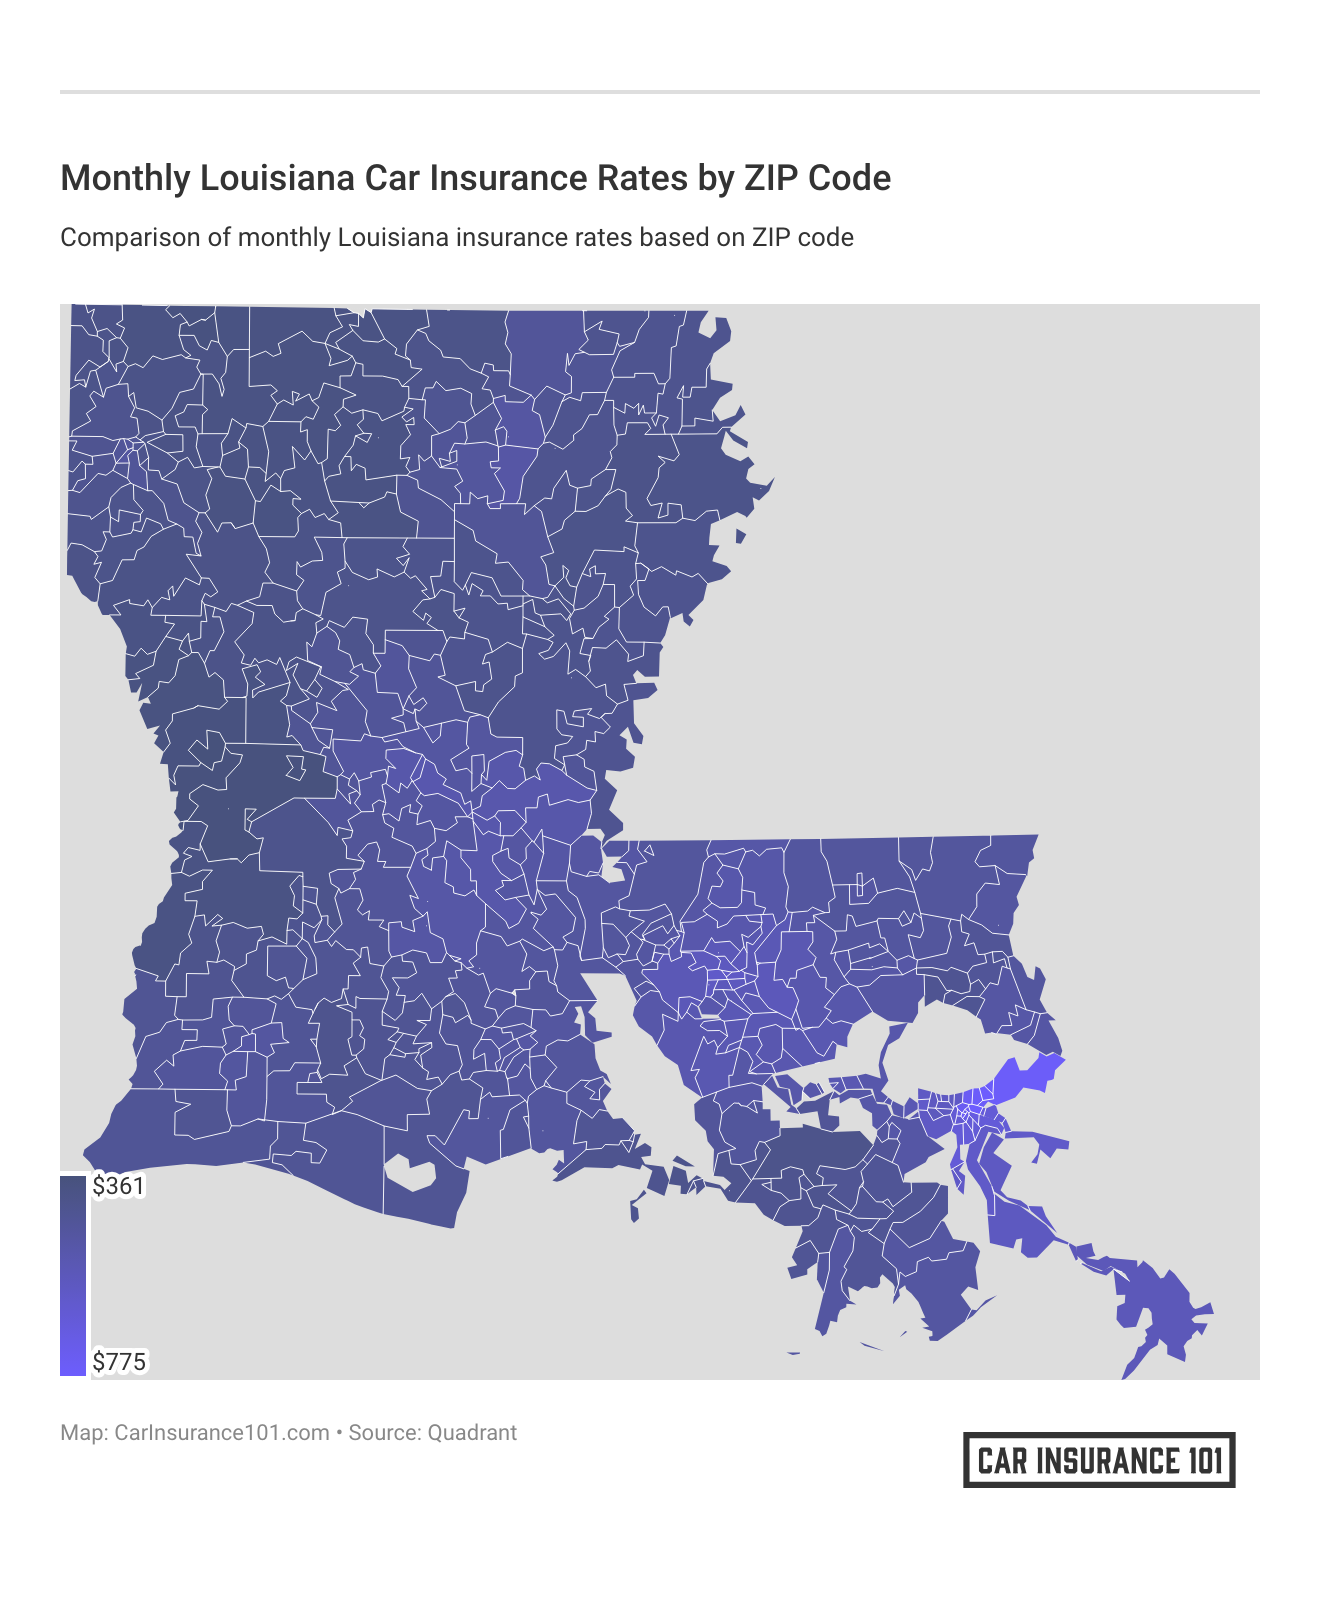 <h3>Monthly Louisiana Car Insurance Rates by ZIP Code</h3>